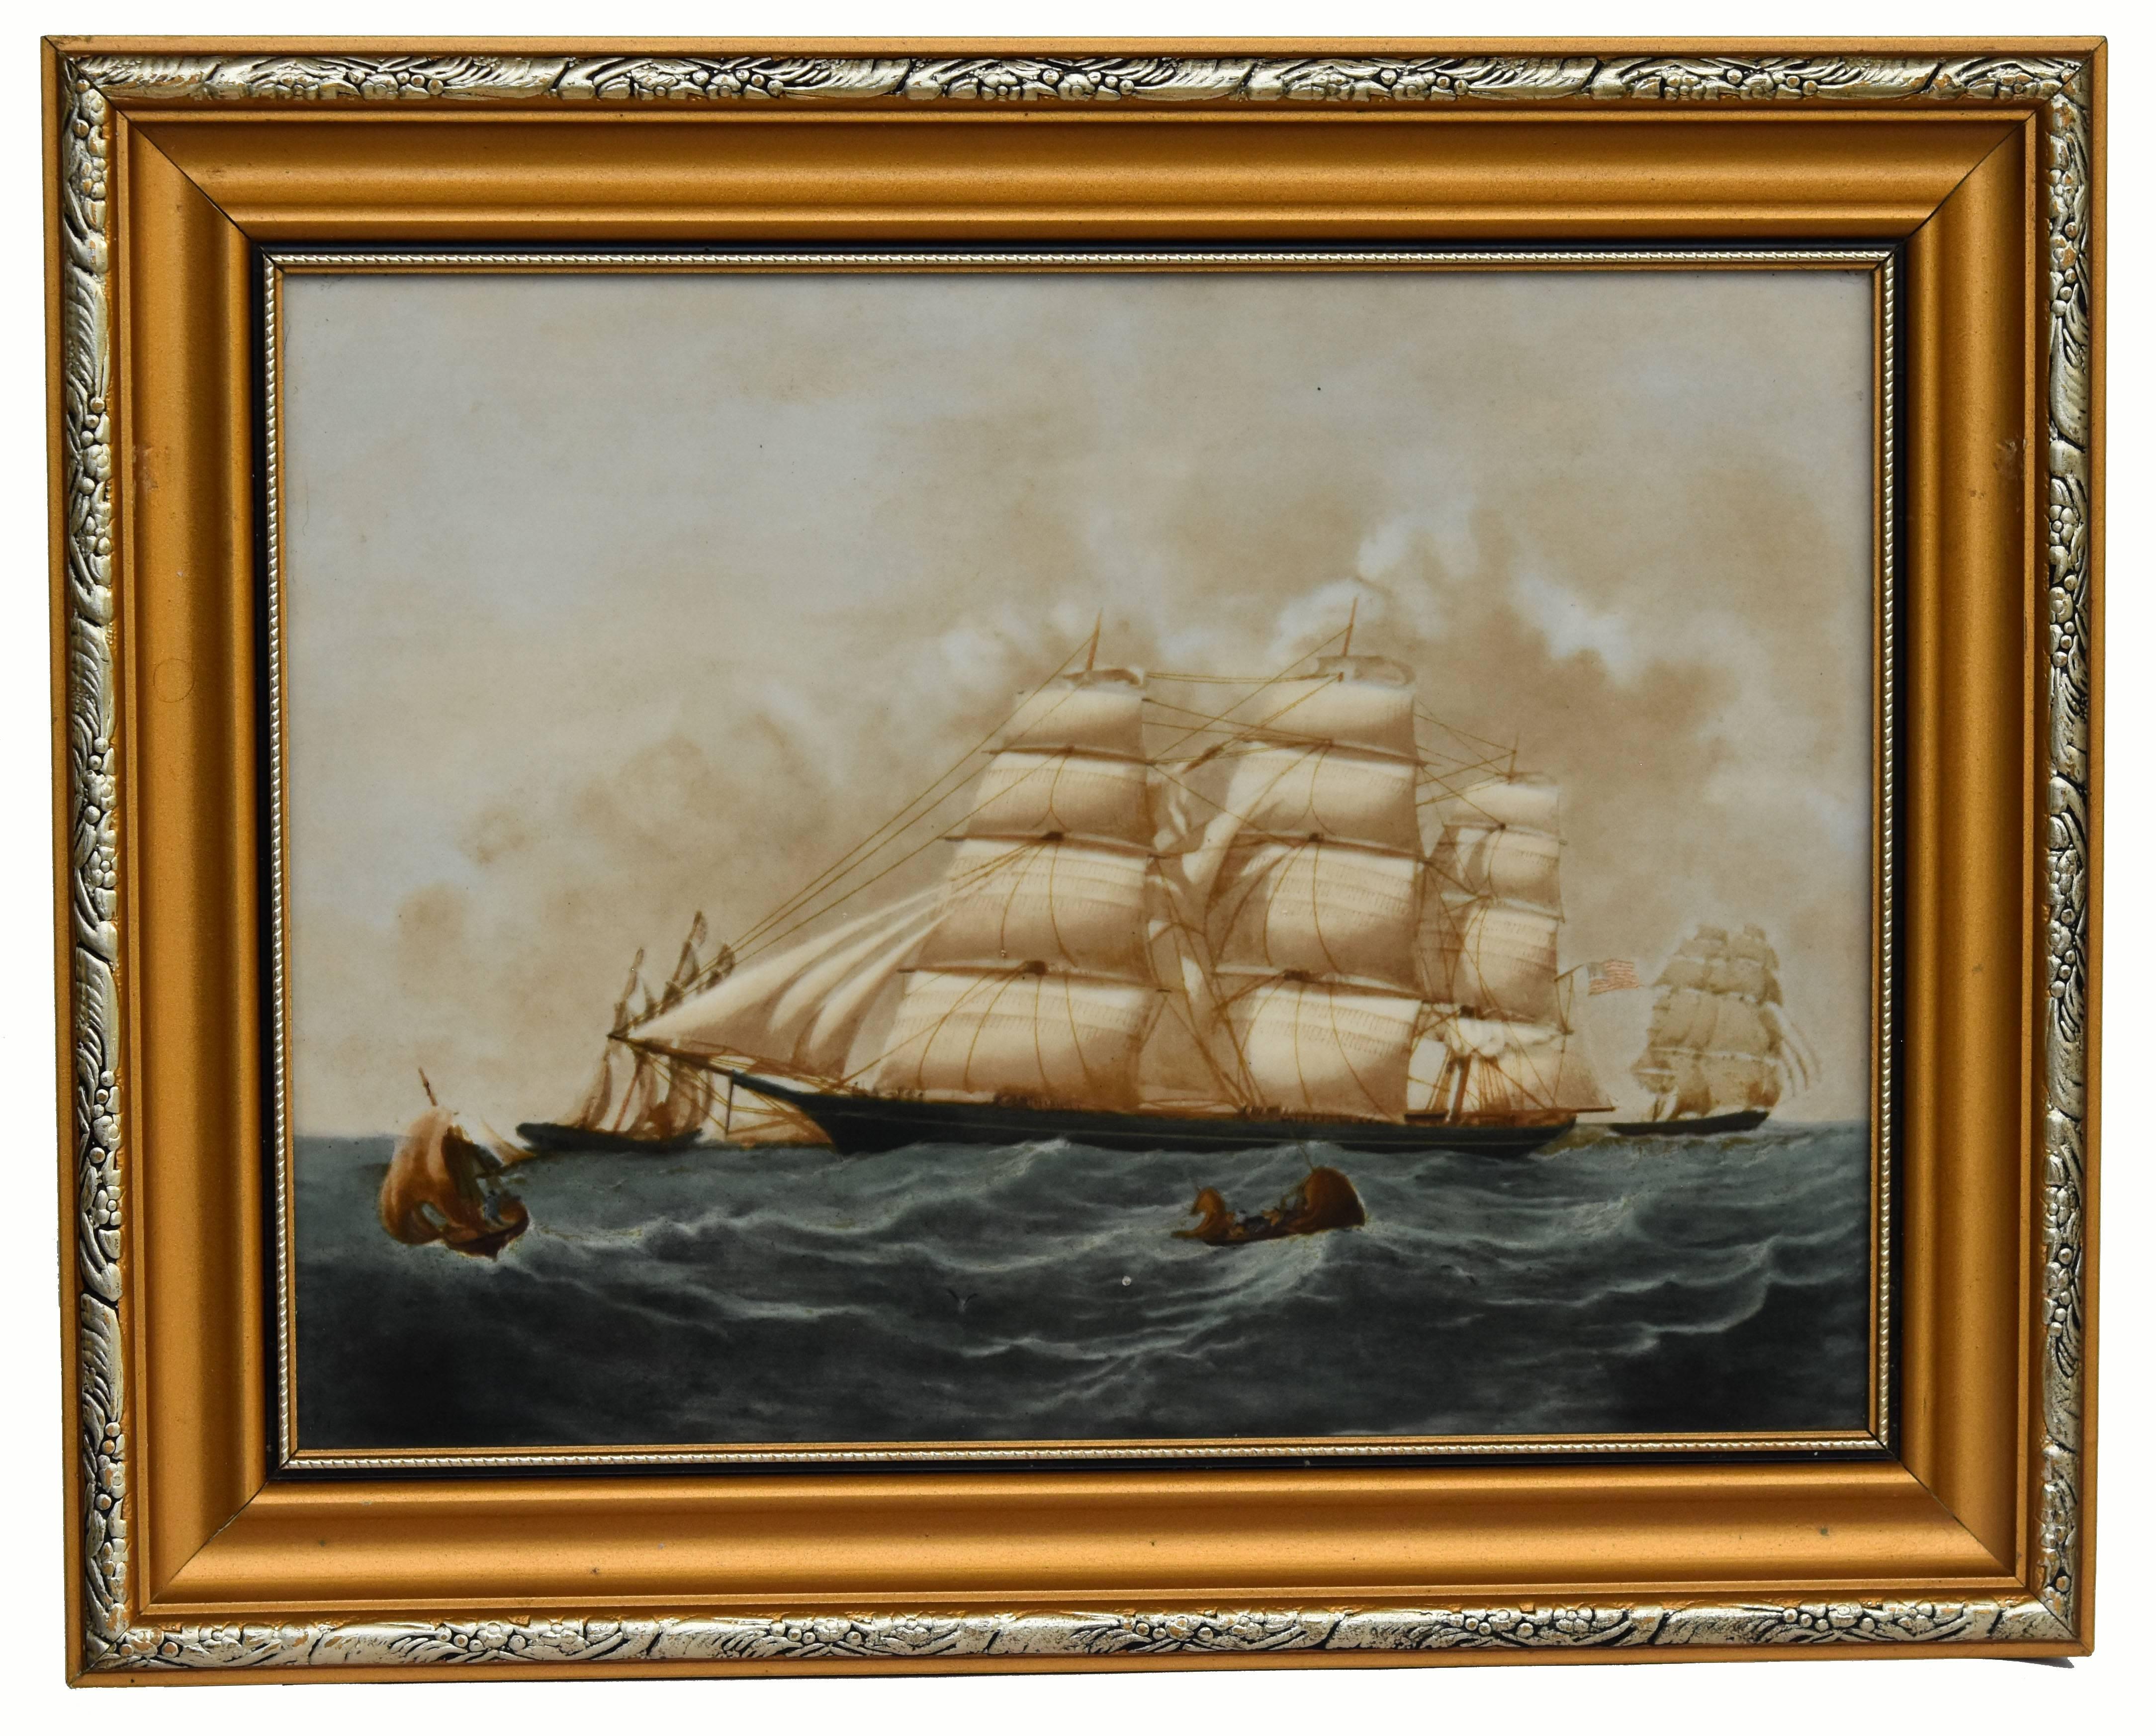 Clipper Ships of America after Original Painting Nautical Sailing Framed Plaques In Excellent Condition For Sale In London, United Kindgom